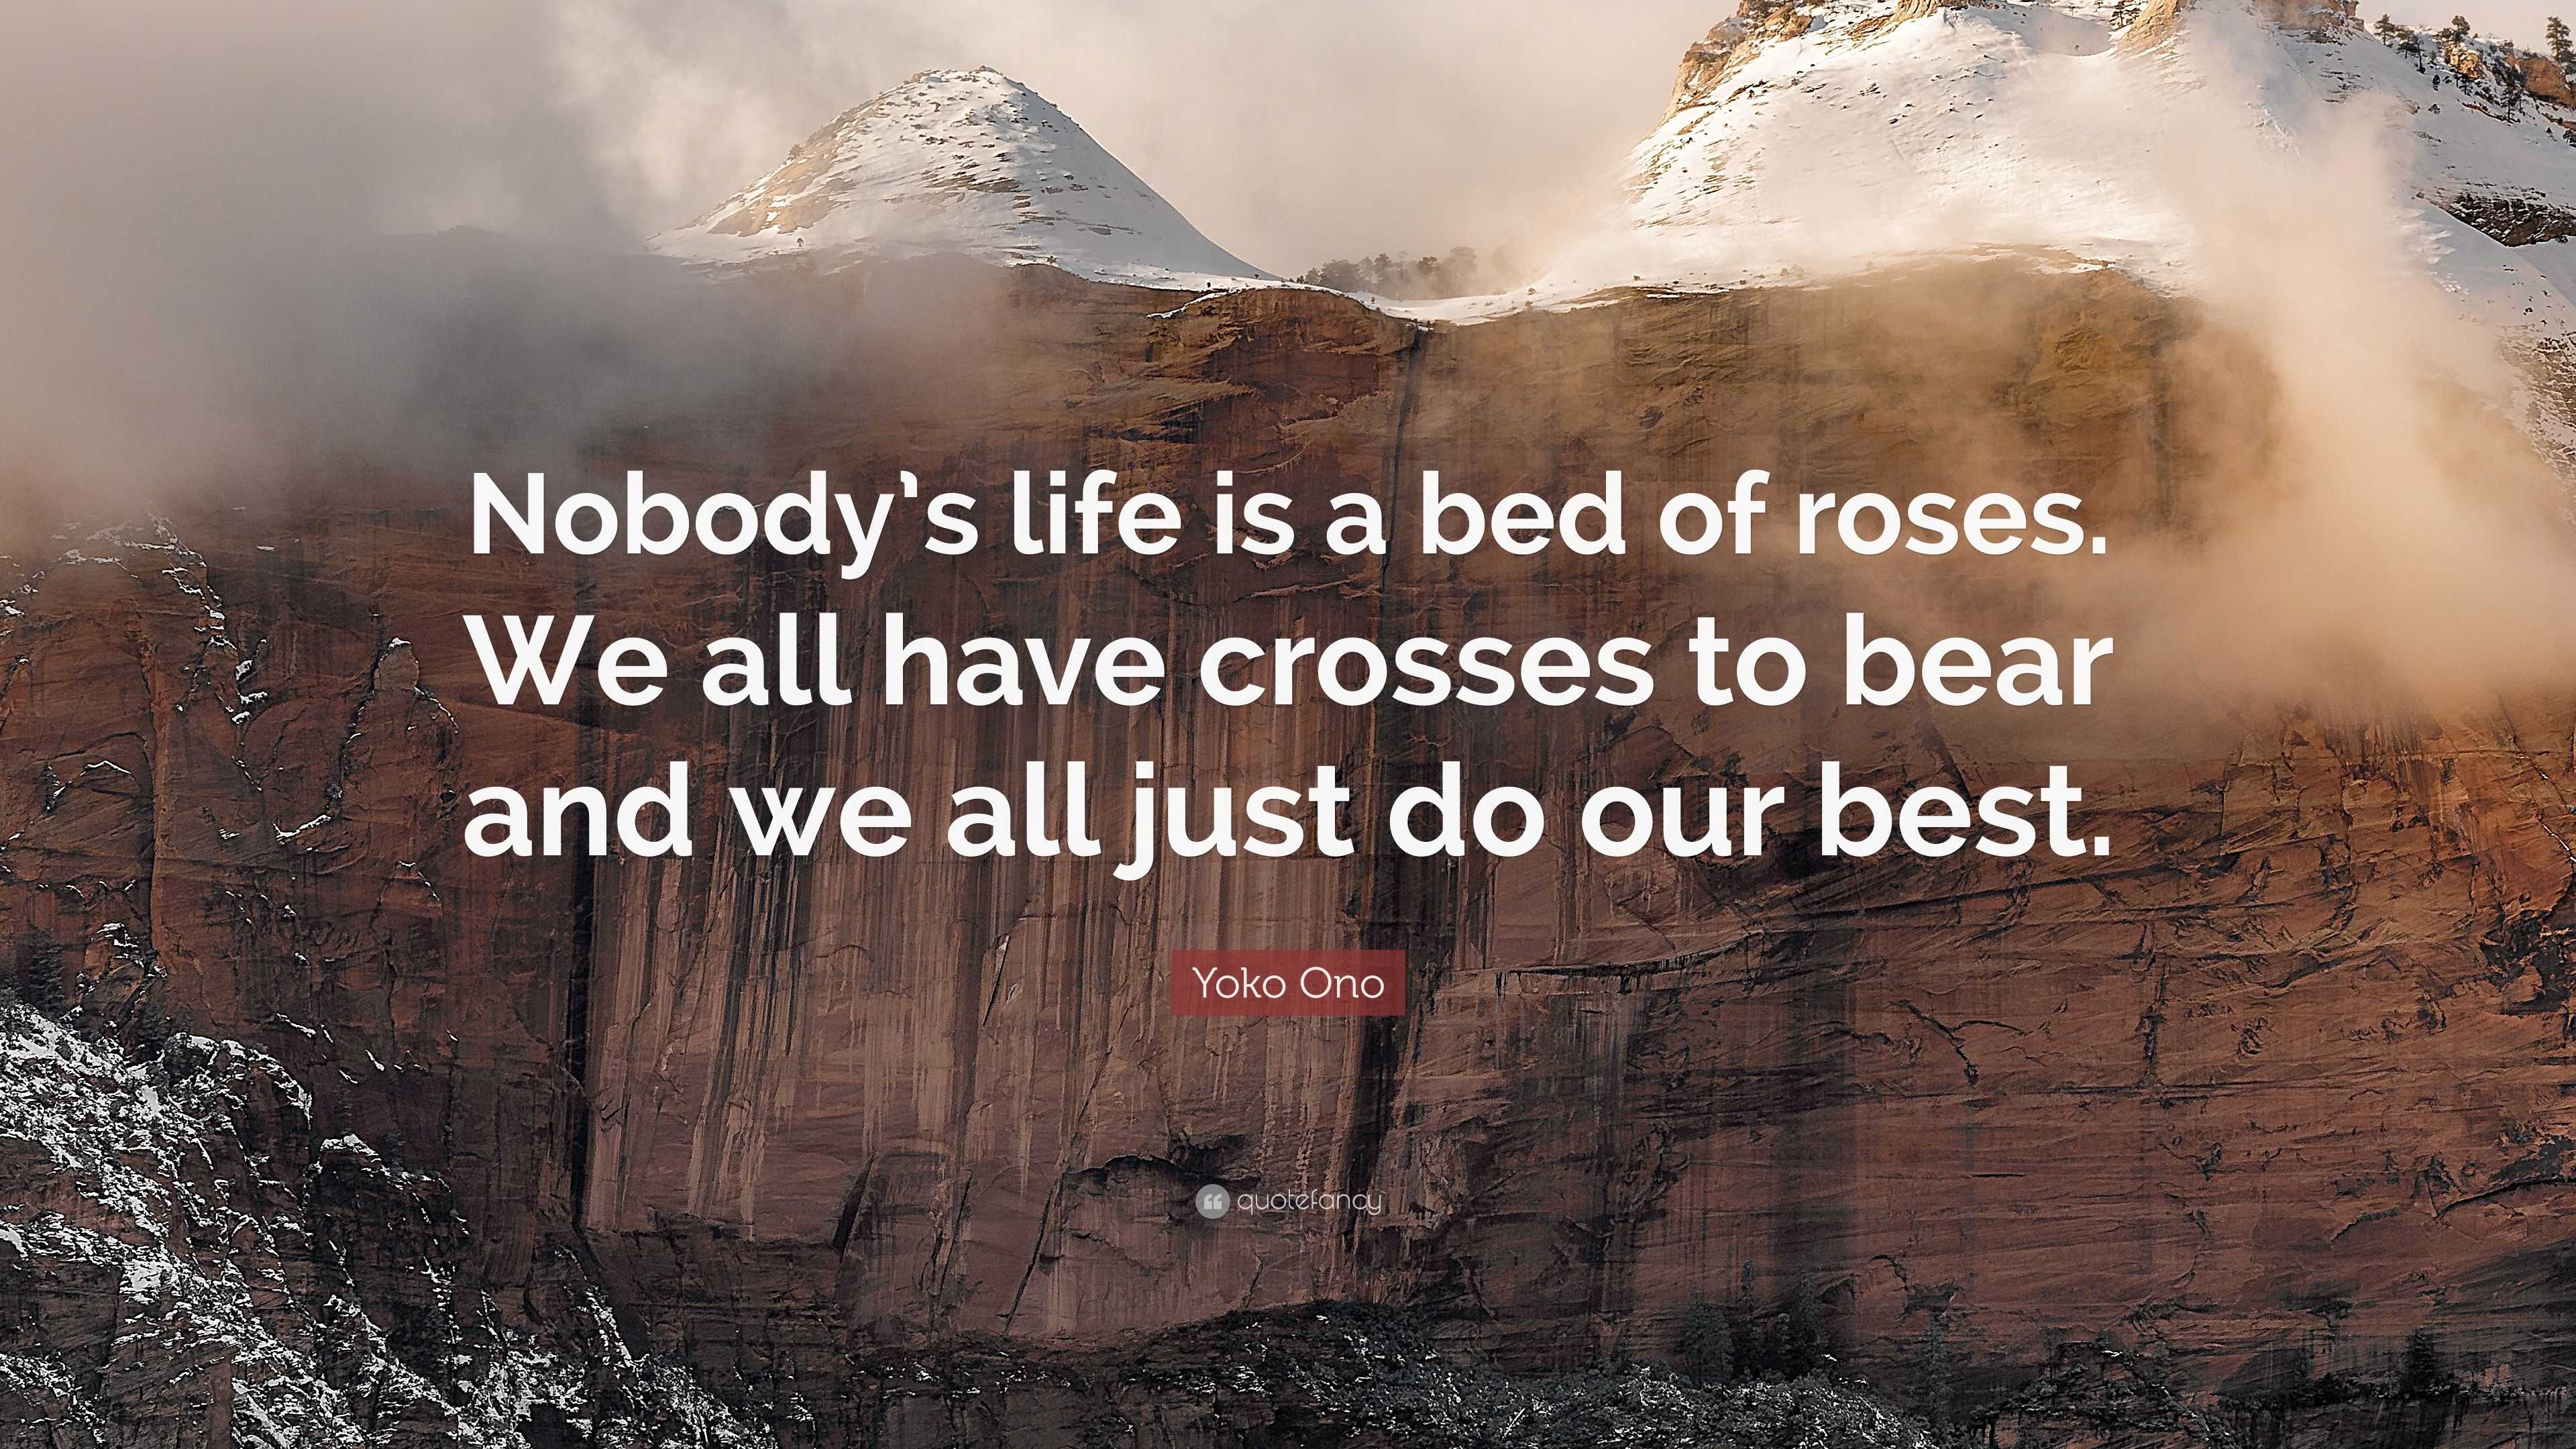 speech on life is not a bed of roses